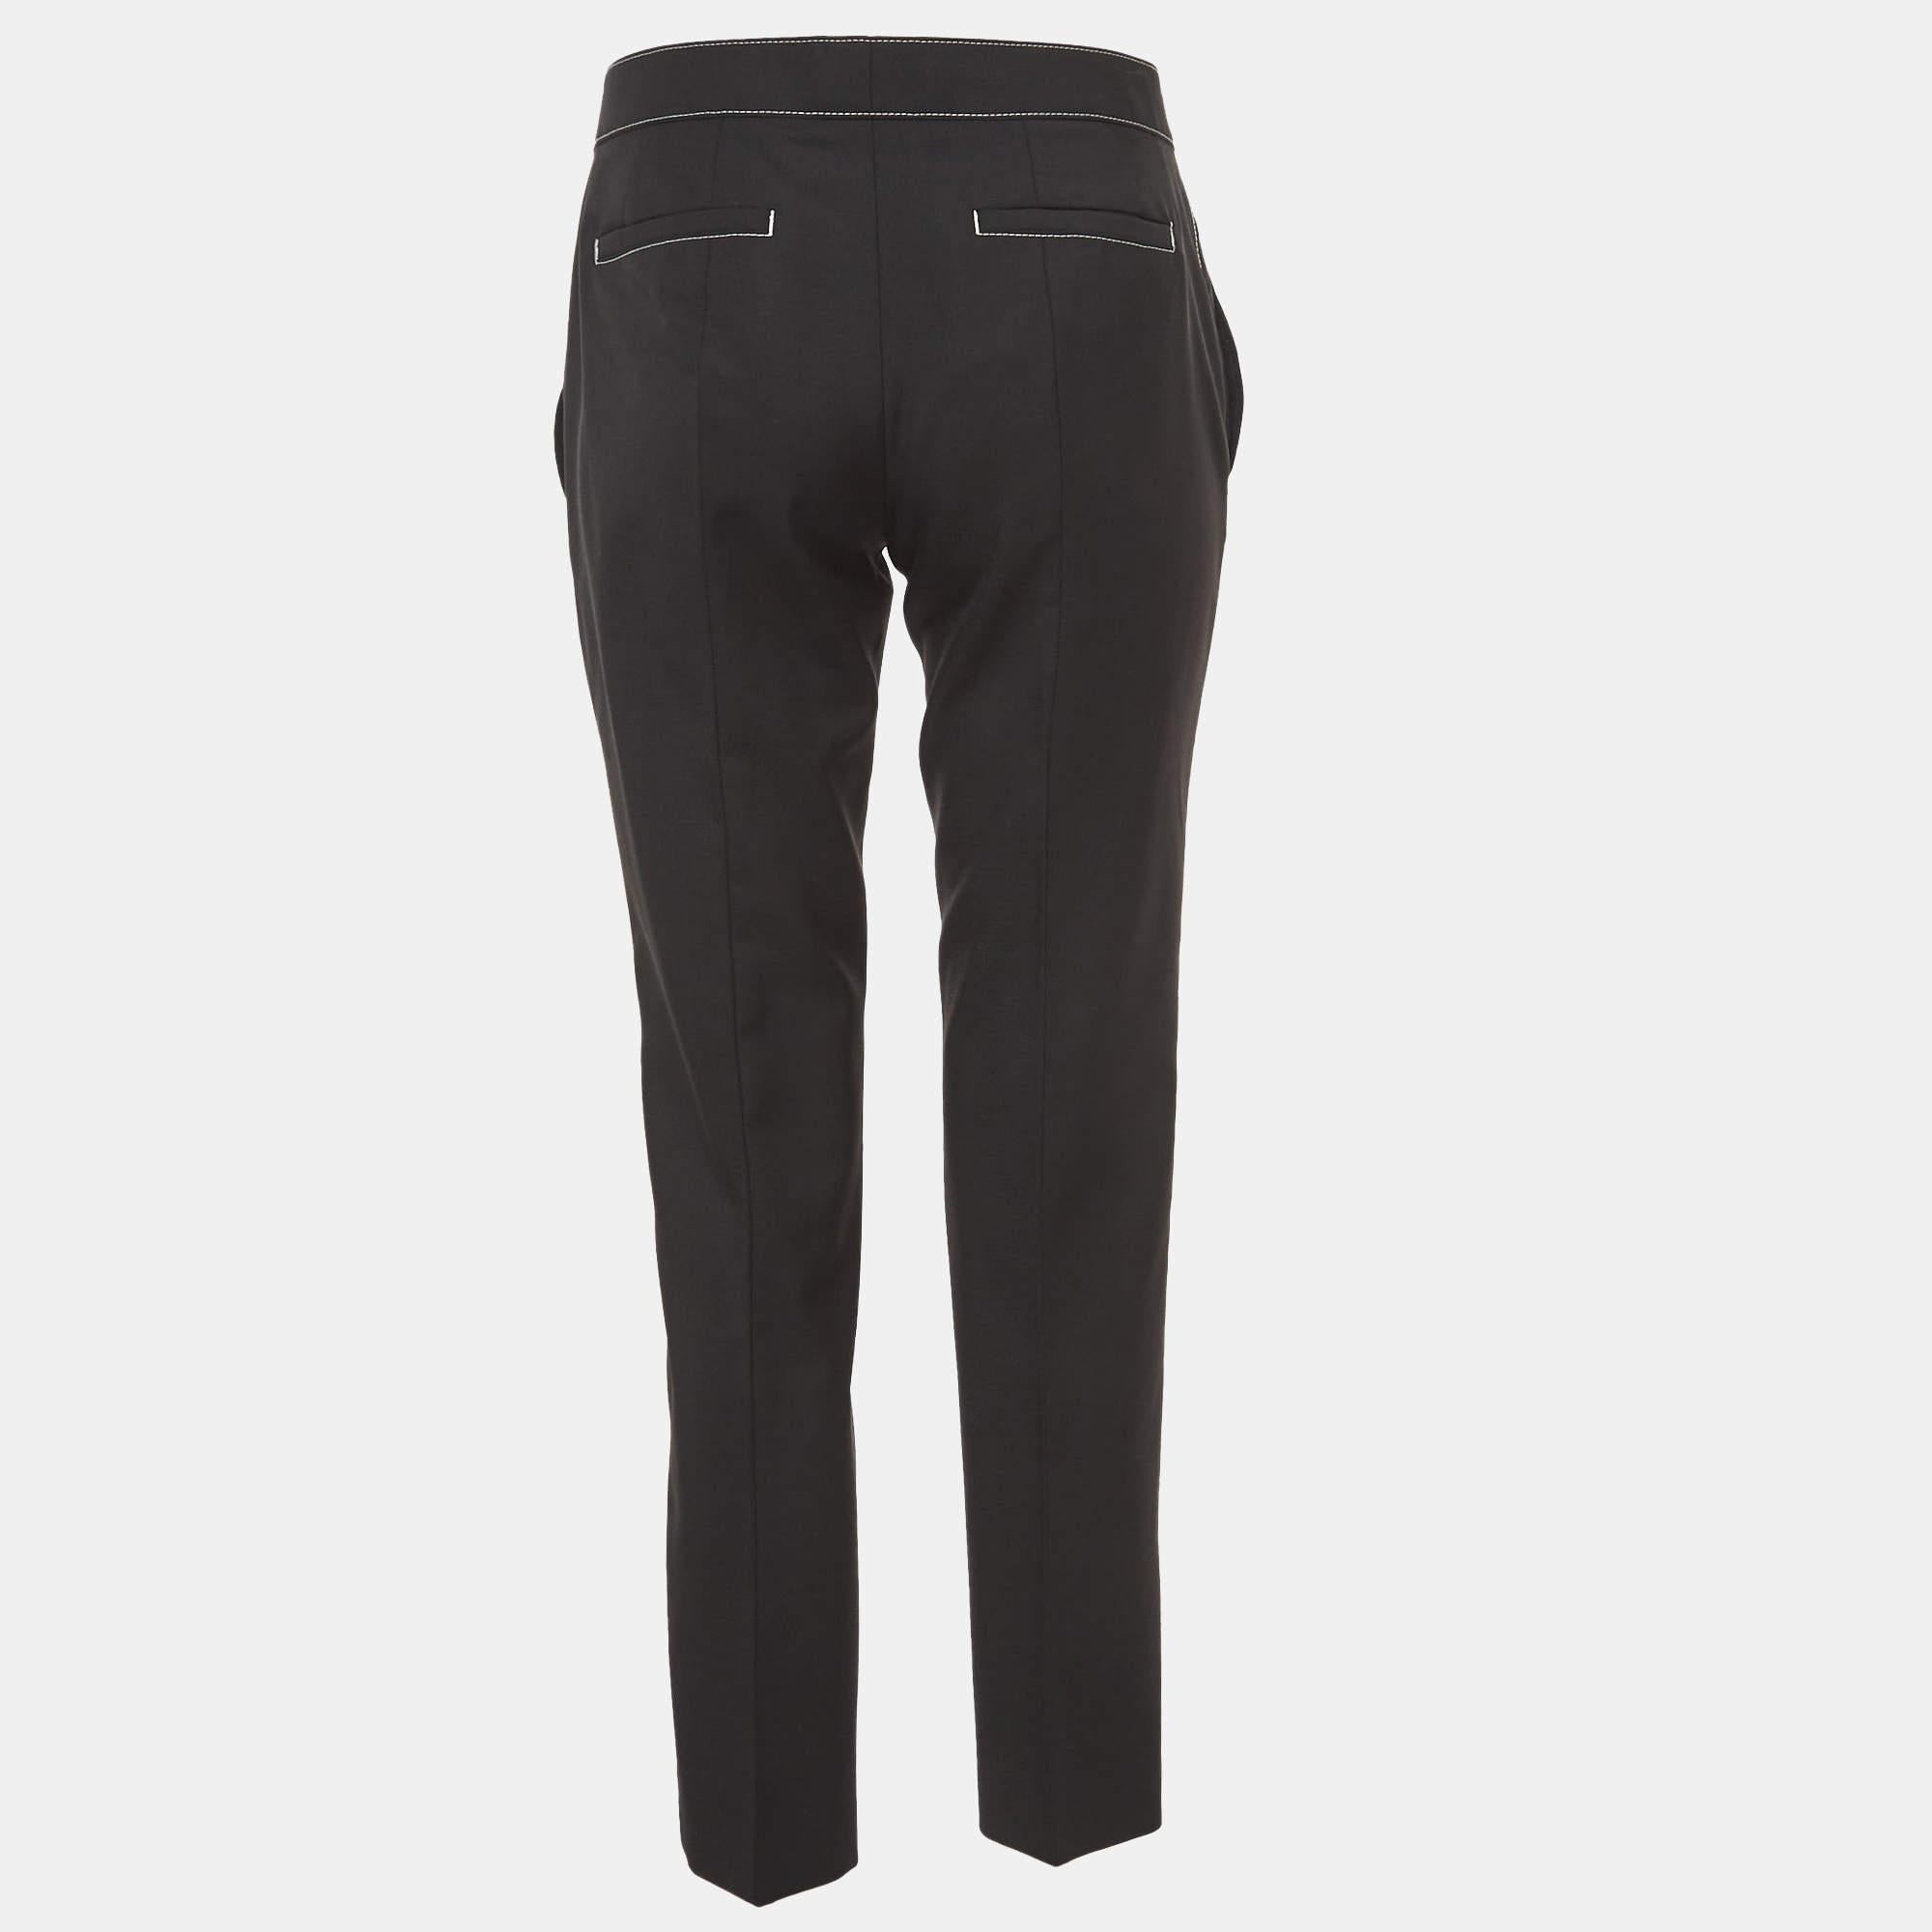 Impeccably tailored pants are a staple in a well-curated wardrobe. These designer trousers are finely sewn to give you the desired look and all-day comfort.

